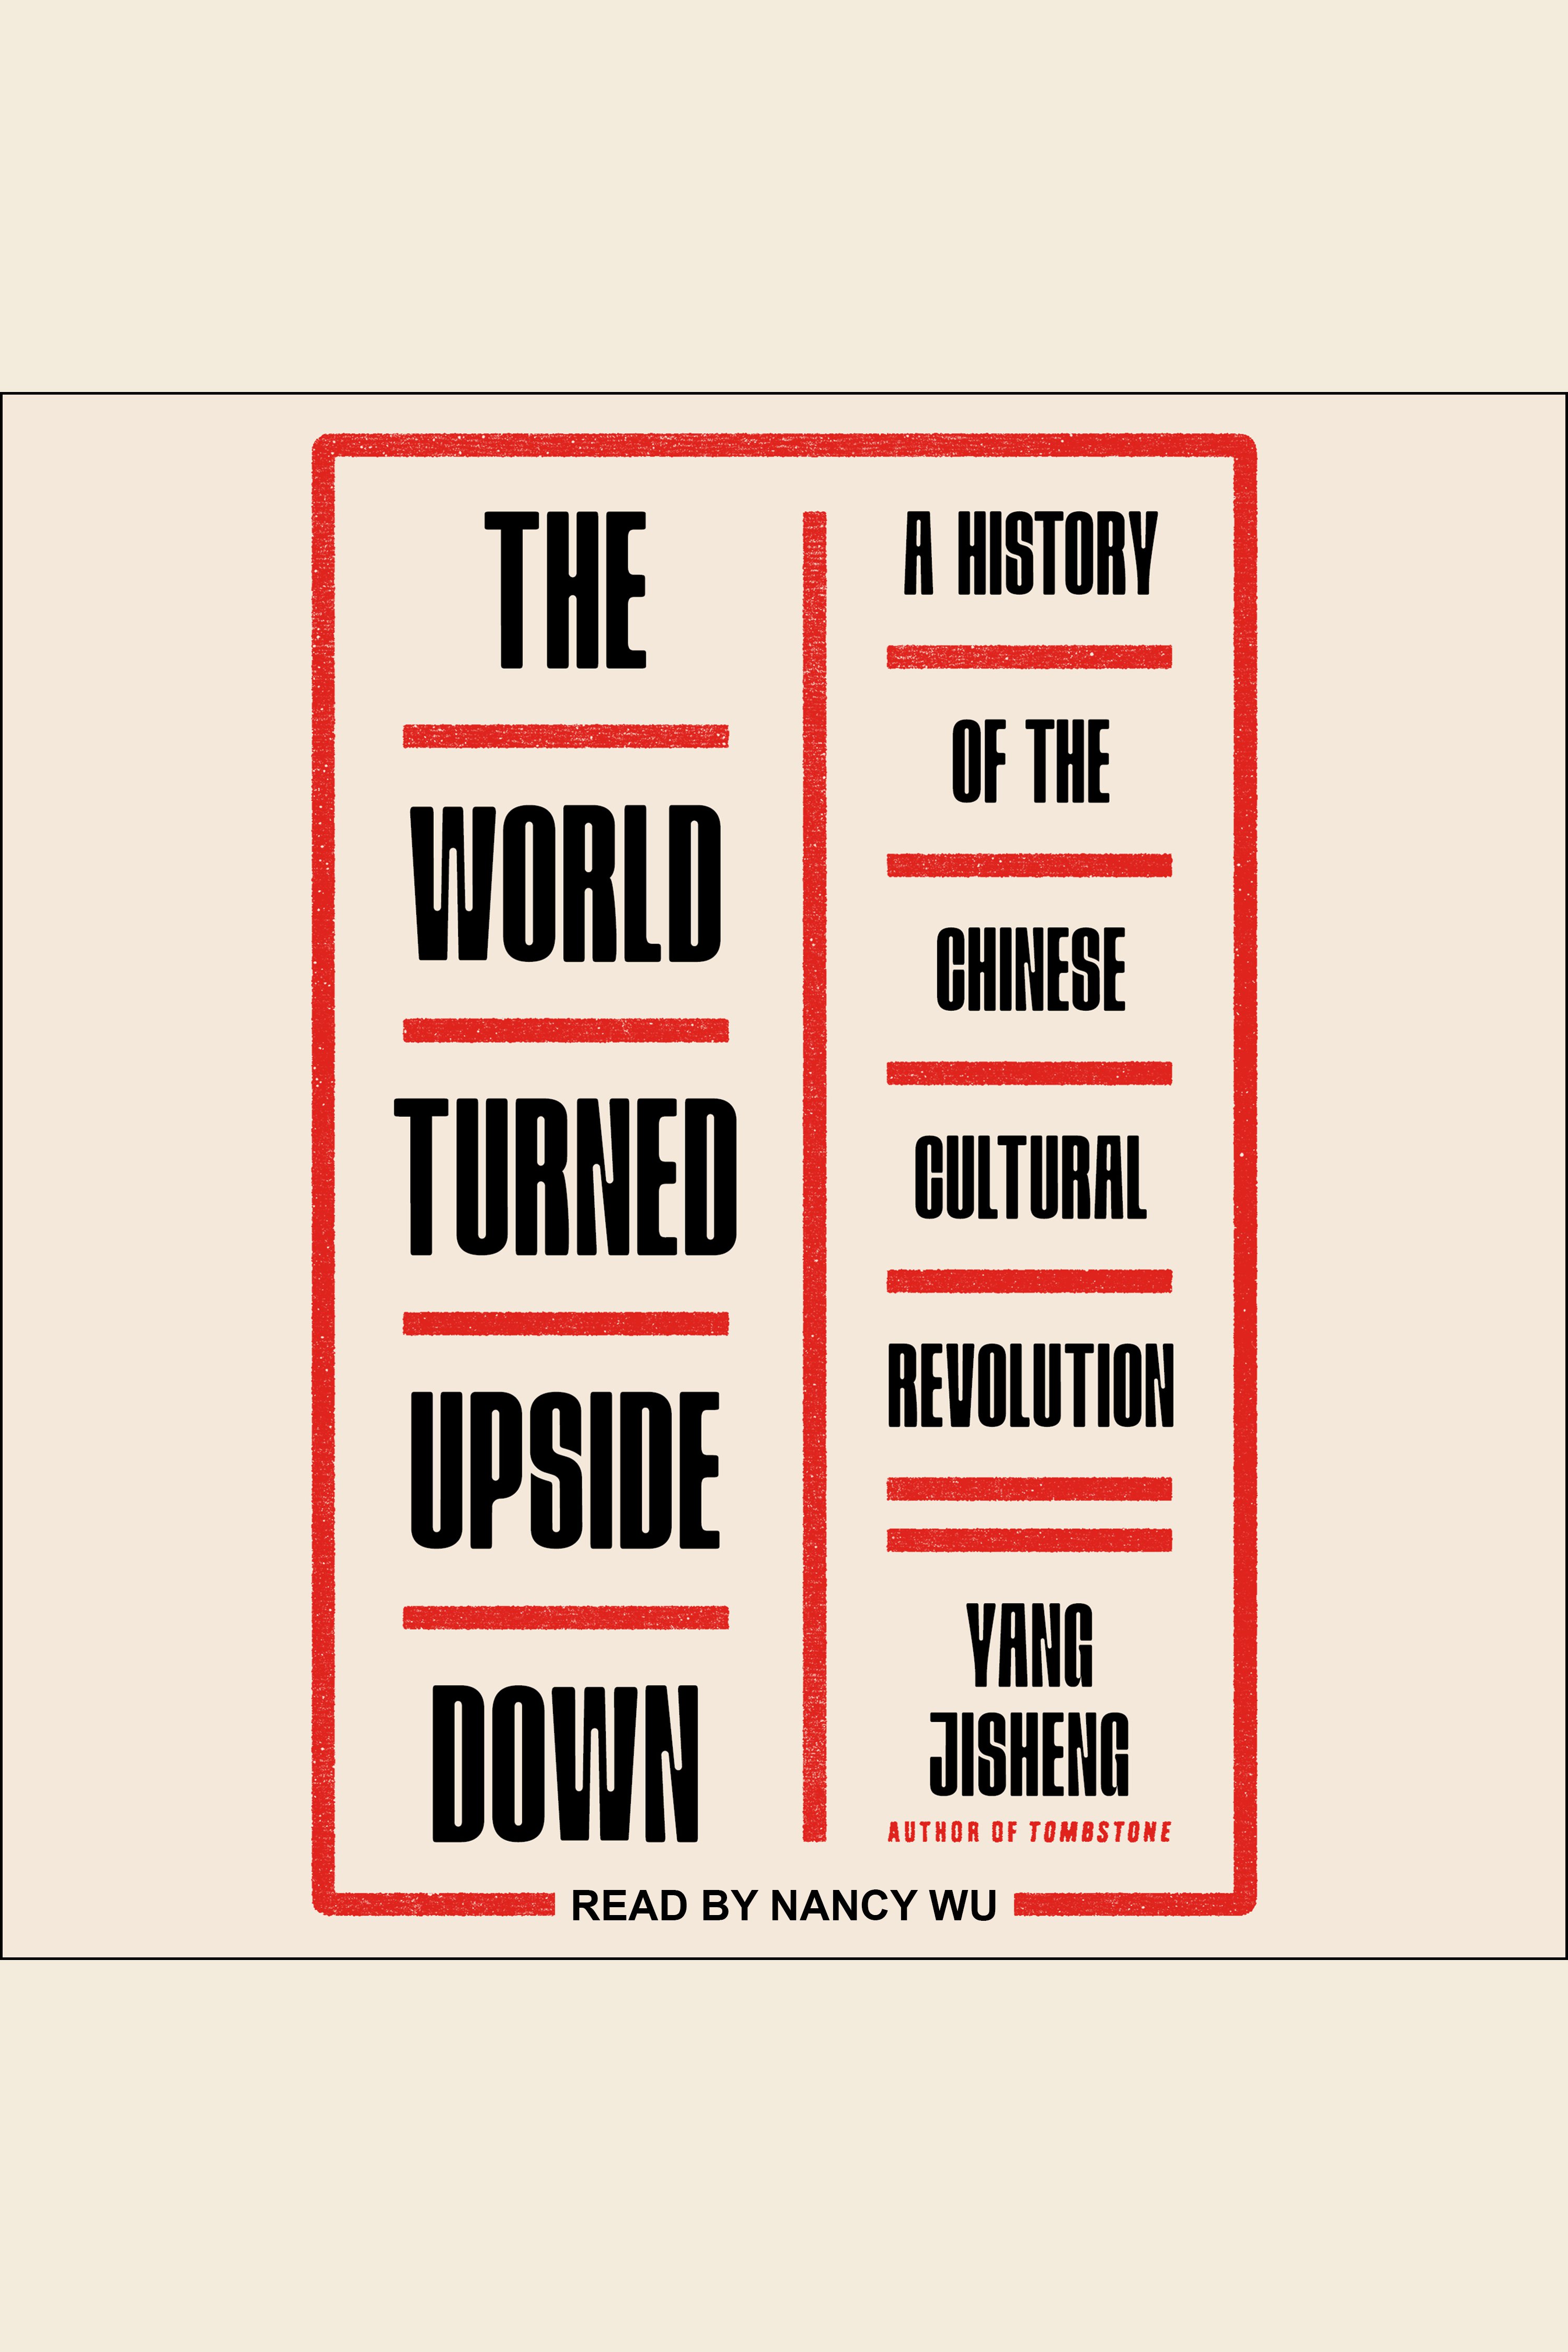 Umschlagbild für The World Turned Upside Down [electronic resource] : A History of the Chinese Cultural Revolution